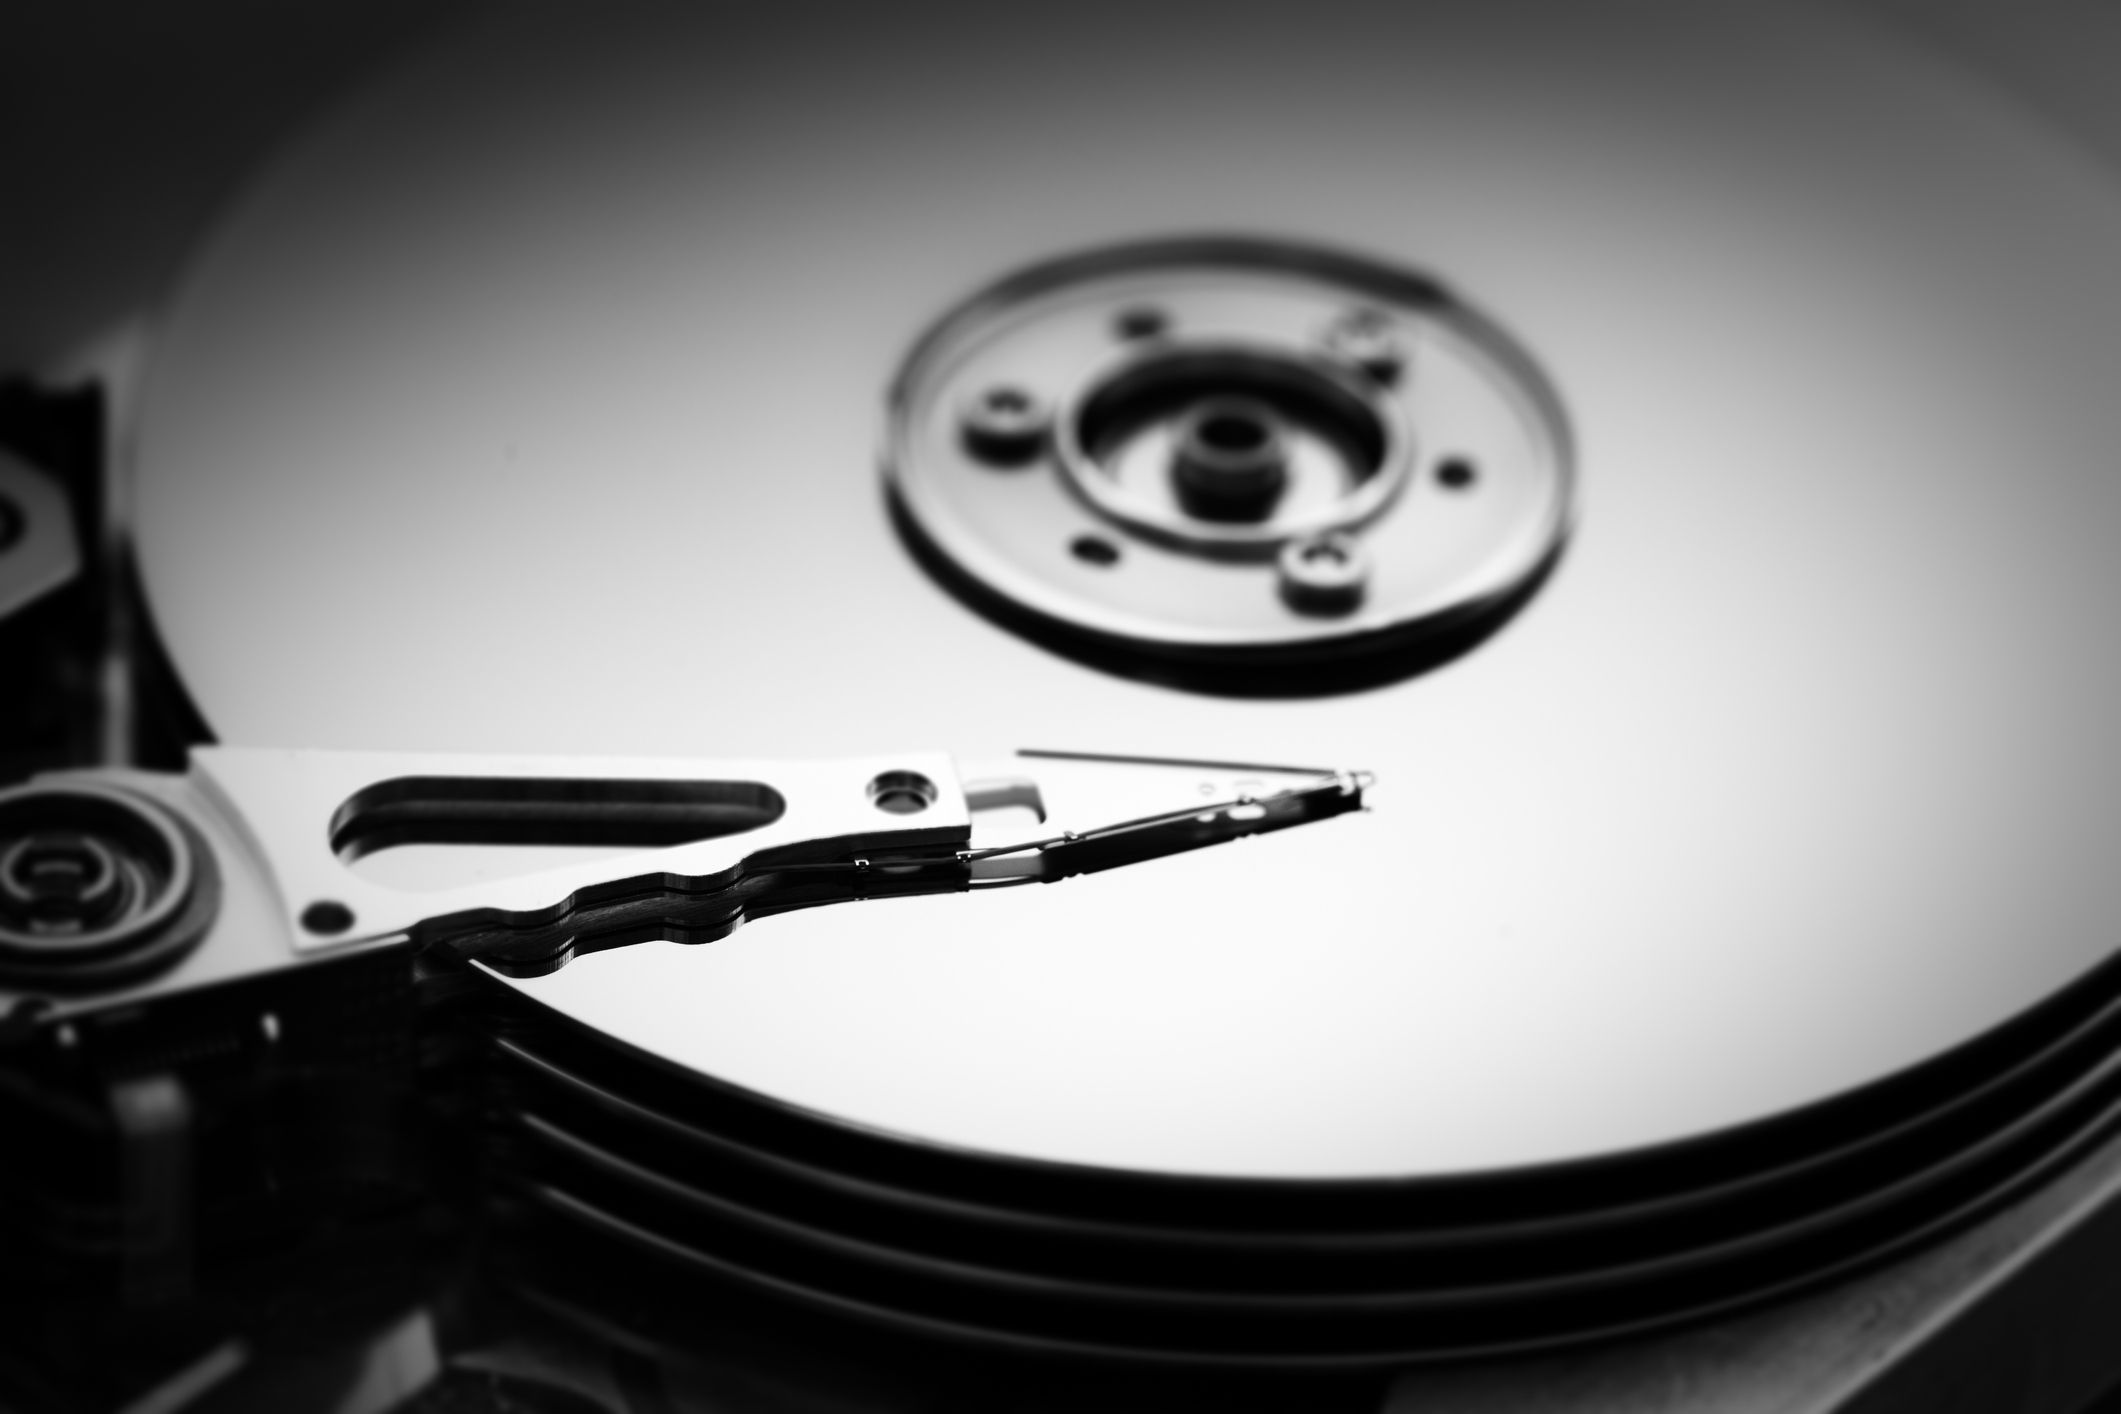 how to clean a hard drive in windows 5069420 1 d107bd79787540c5952388e547a77558